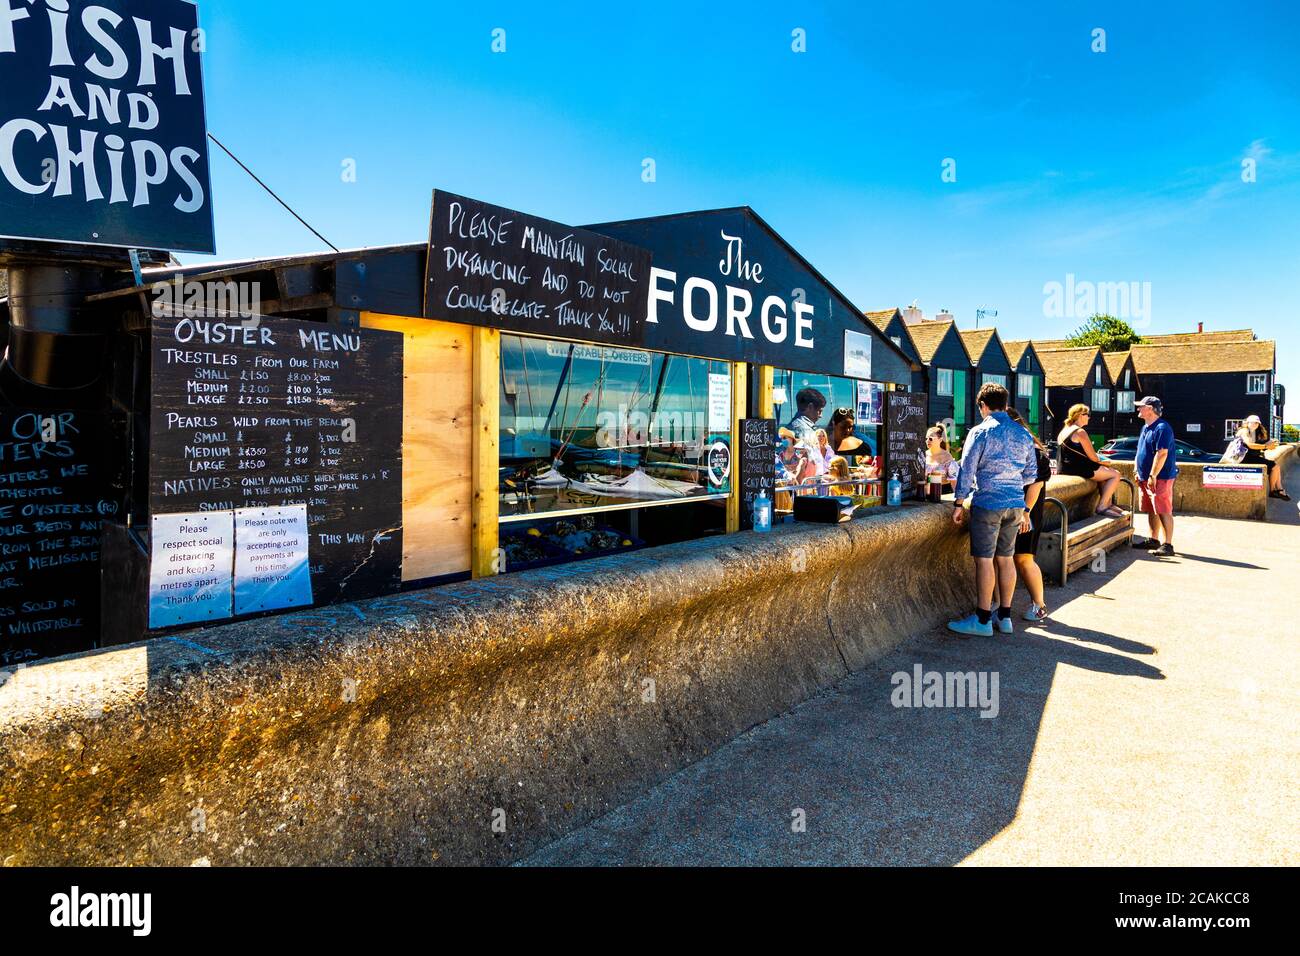 Oyster mare Shack la Forge a Whitstable, Kent, Regno Unito Foto Stock